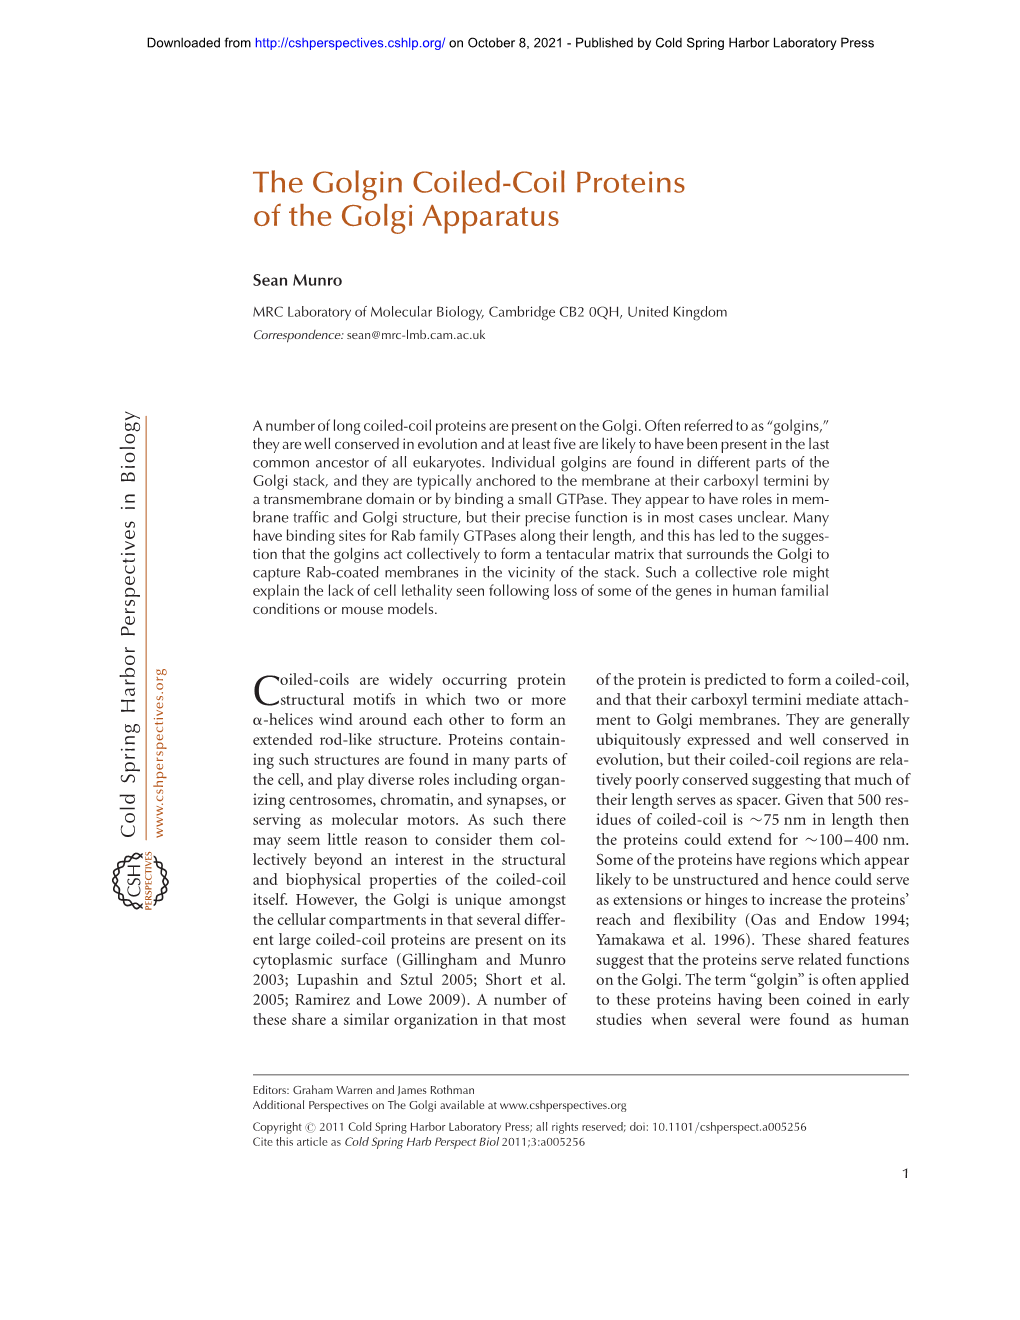 The Golgin Coiled-Coil Proteins of the Golgi Apparatus